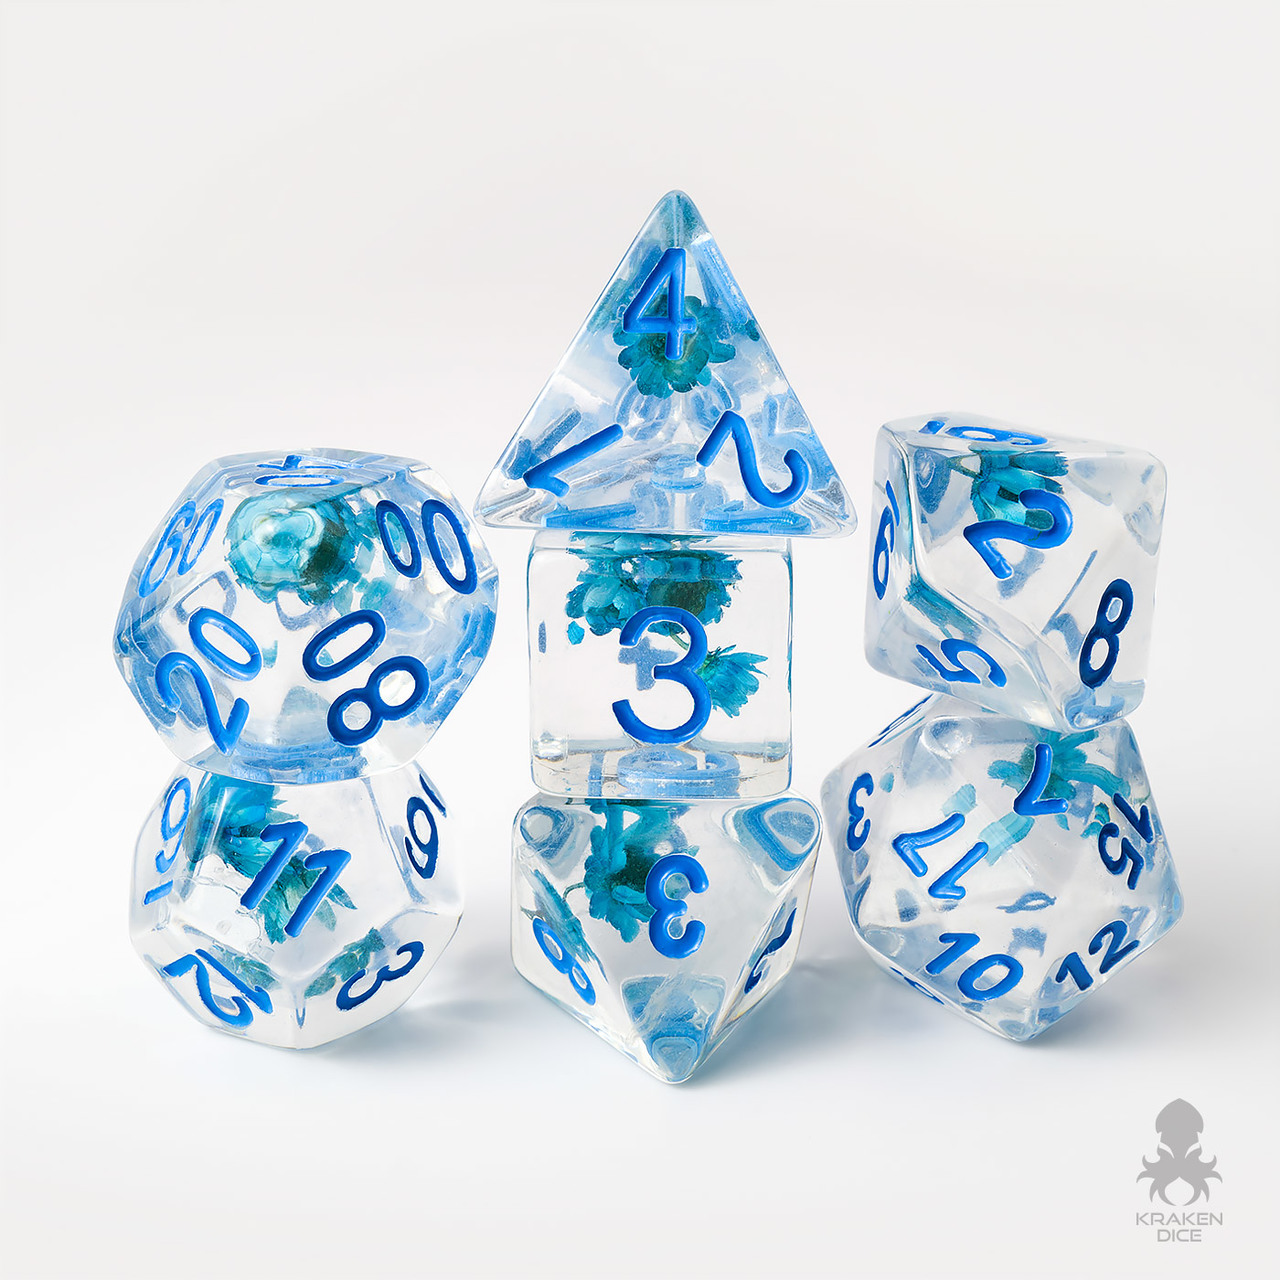 DND dice that are blue with flowers